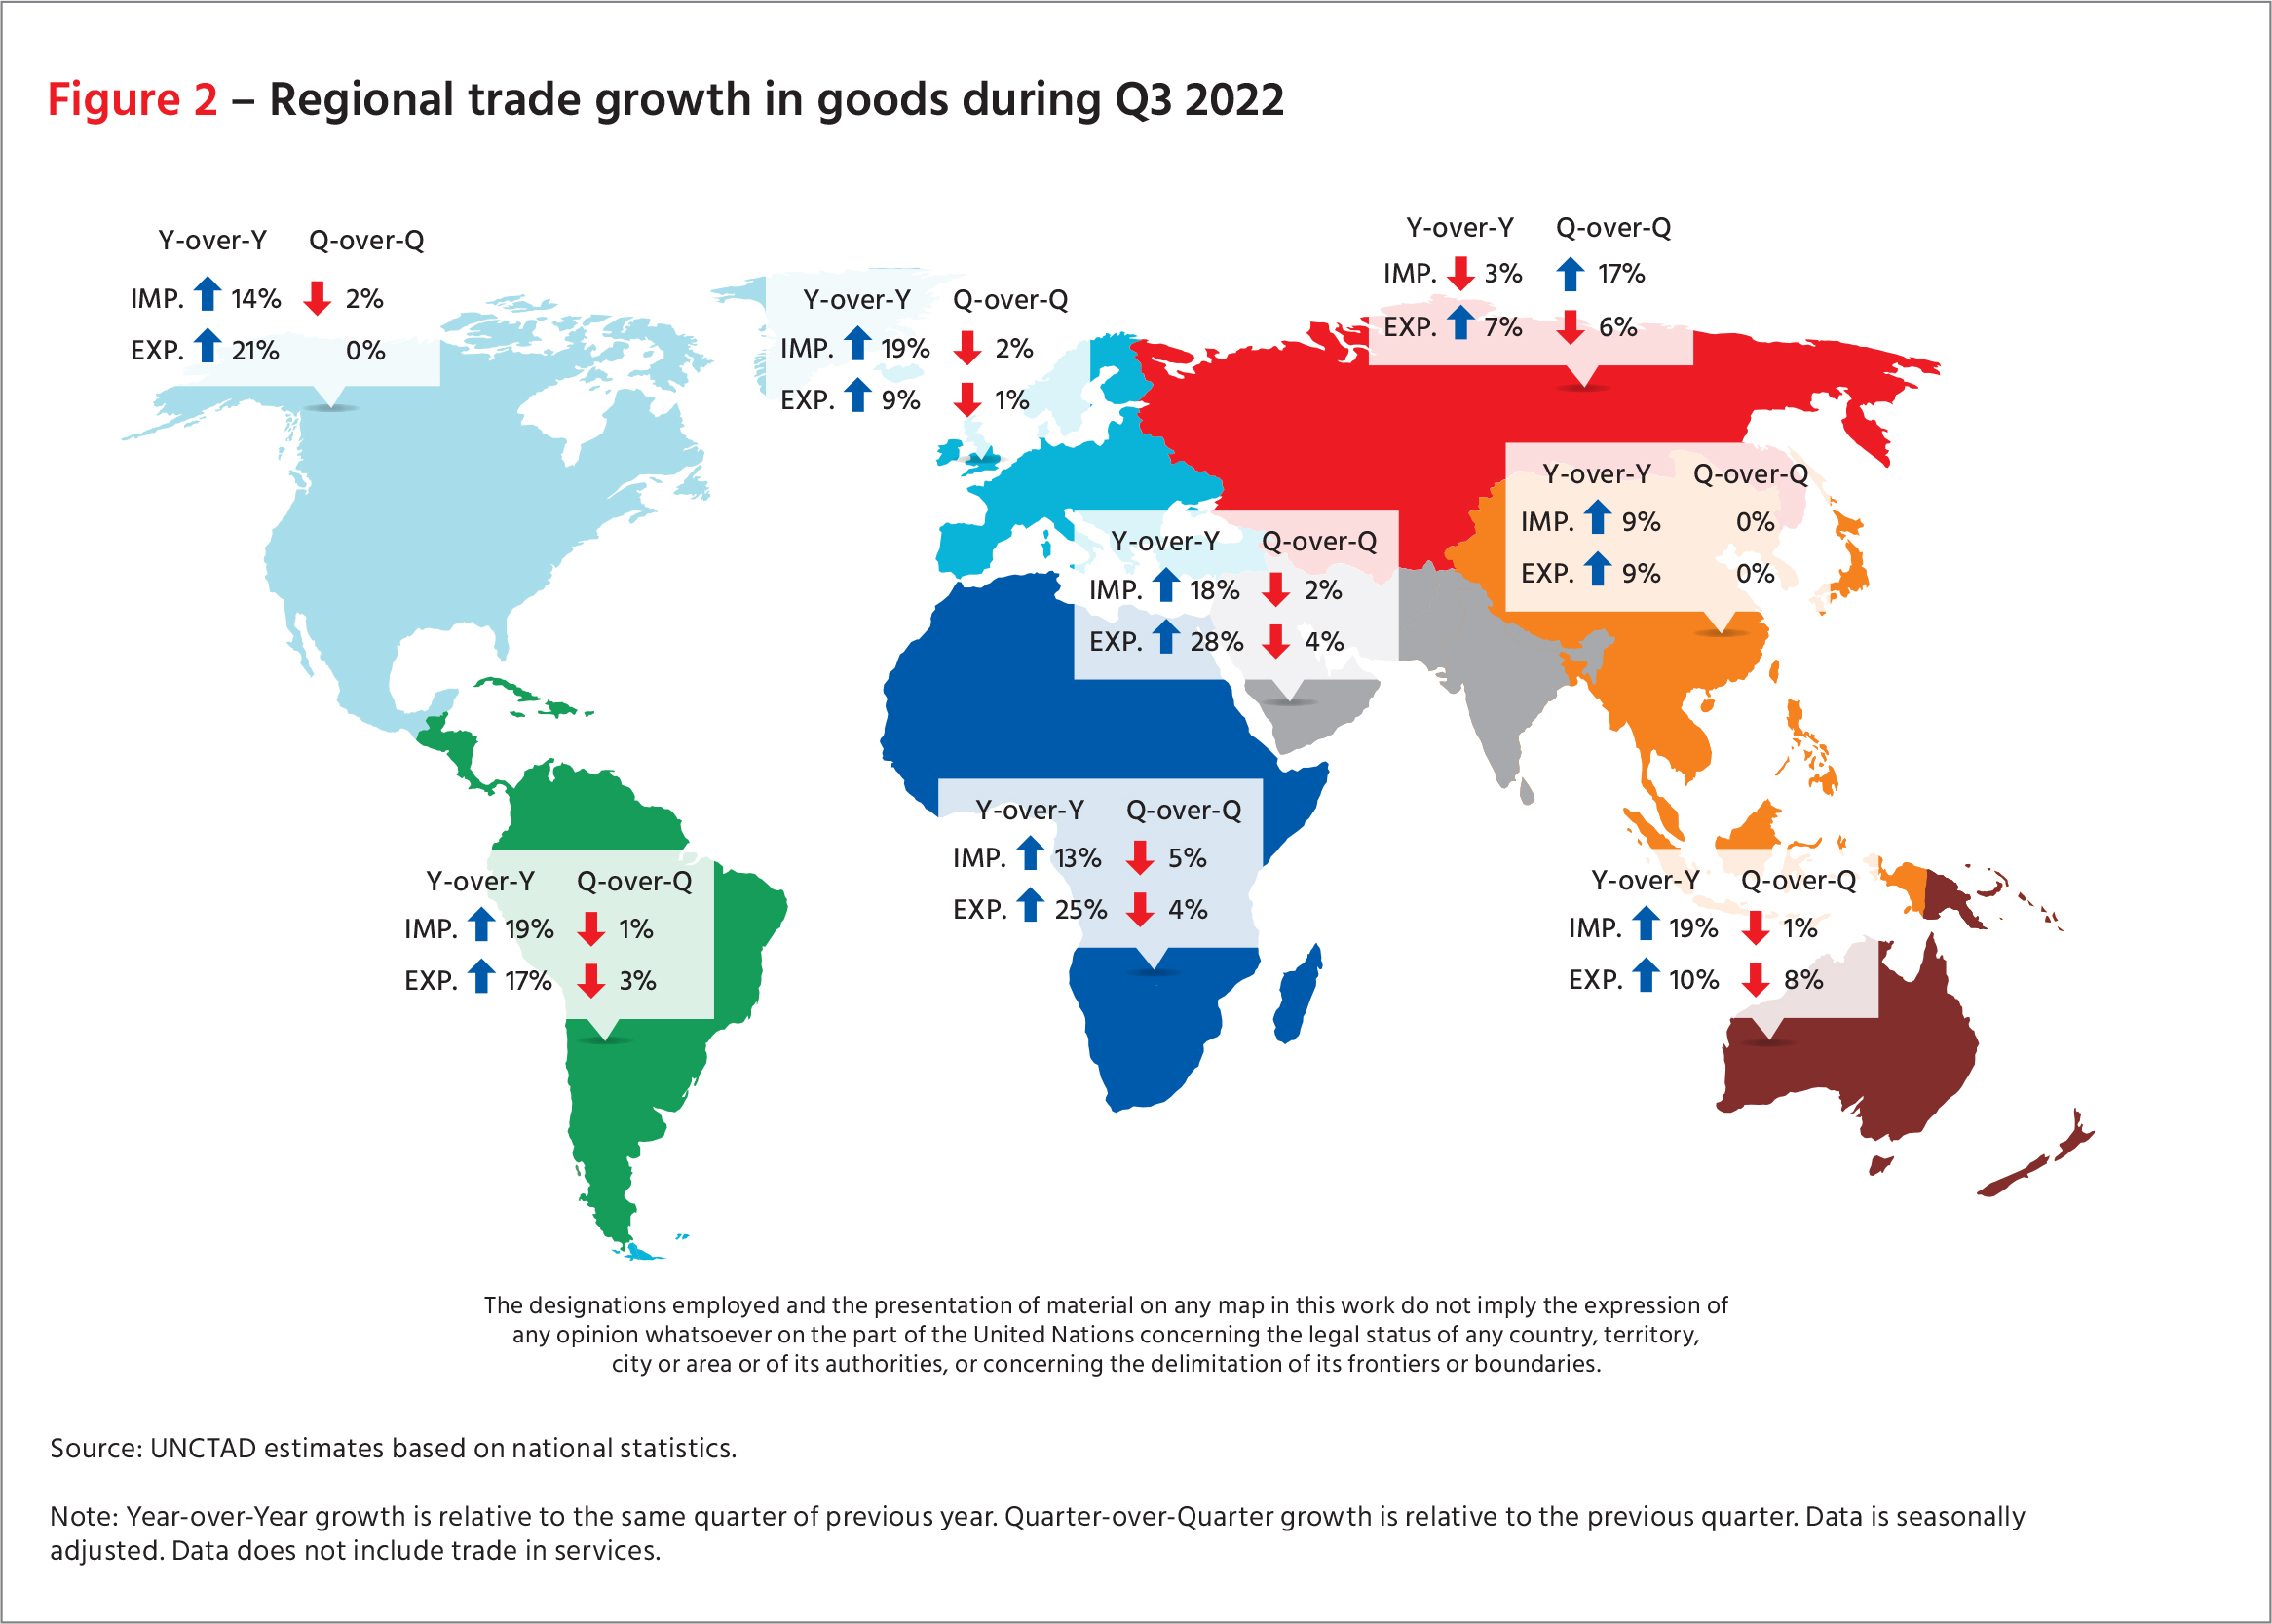 Regional trade growth in goods during Q3 2022